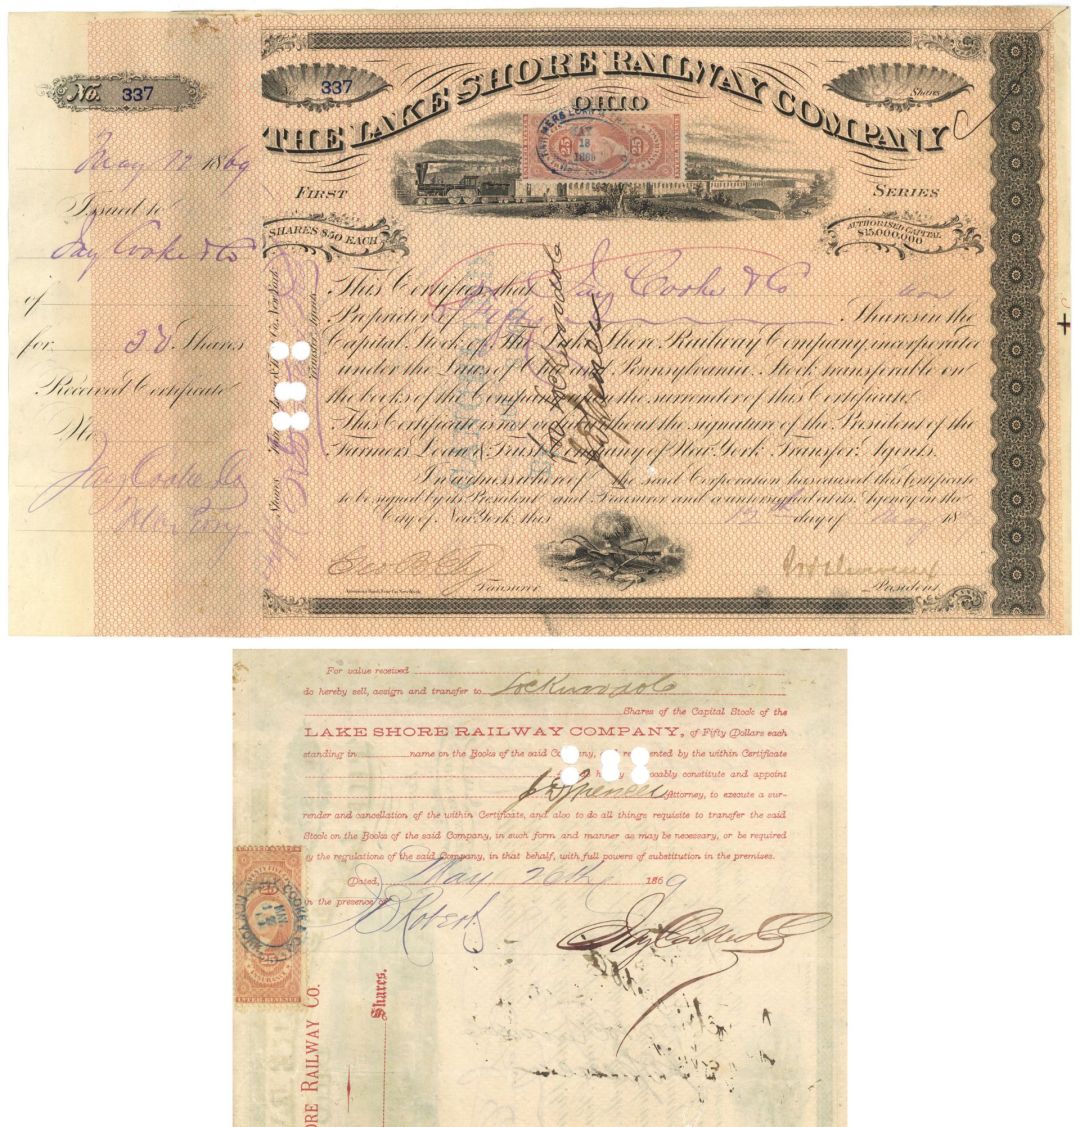 Lake Shore Railway Co. signed by Jay Cooke Sr. and Henry Devereux - 1860's dated Autograph Stock Certificate